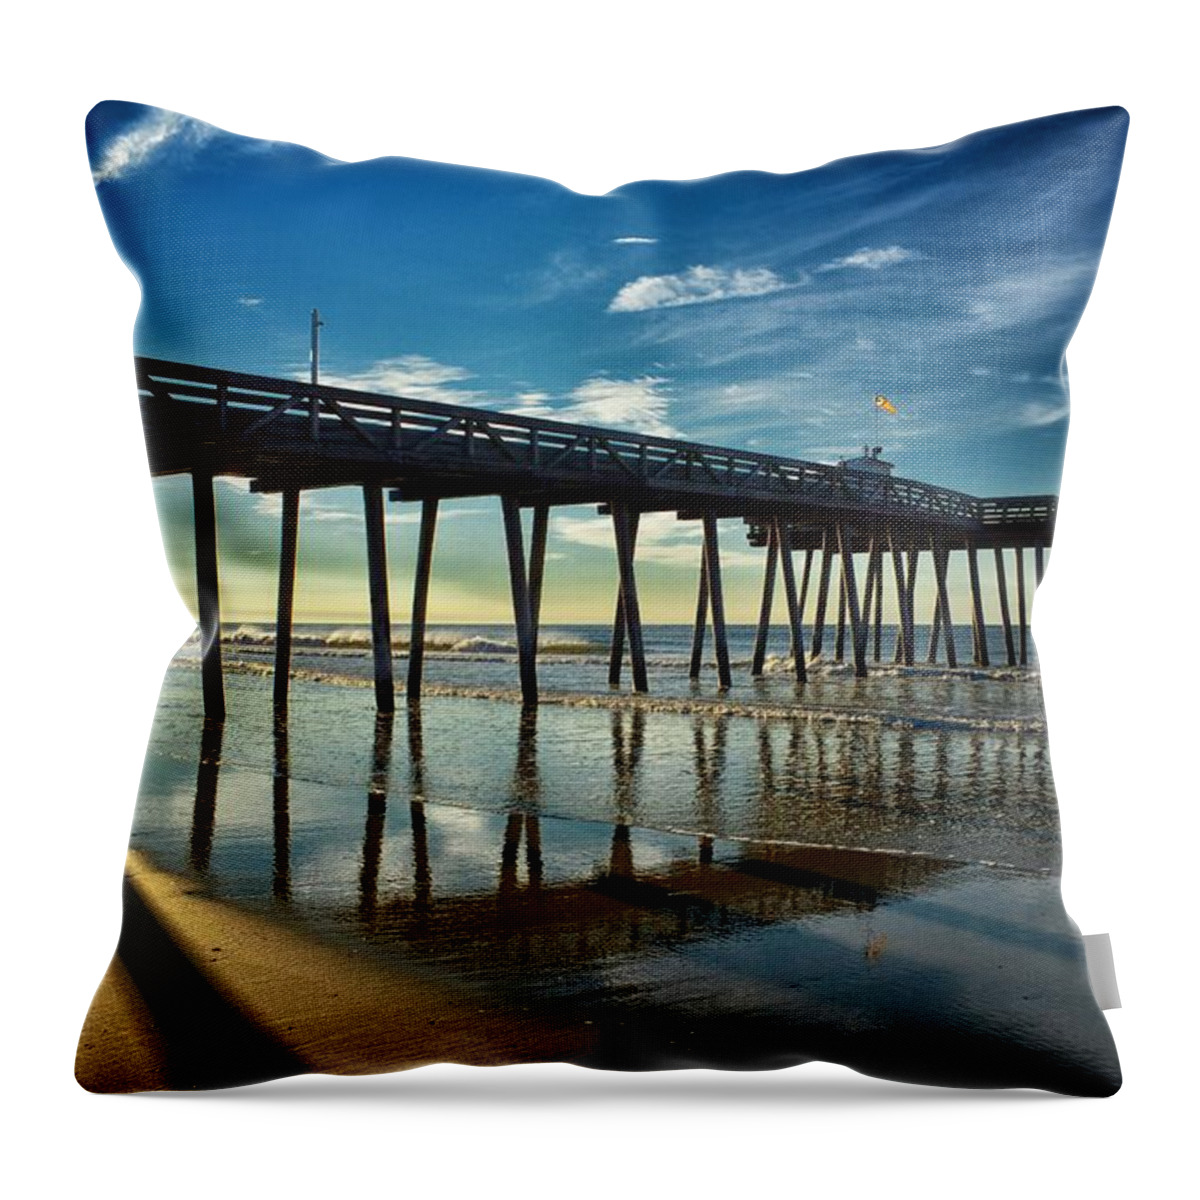 Sunrise Throw Pillow featuring the photograph Sunrise At The Beach by James DeFazio